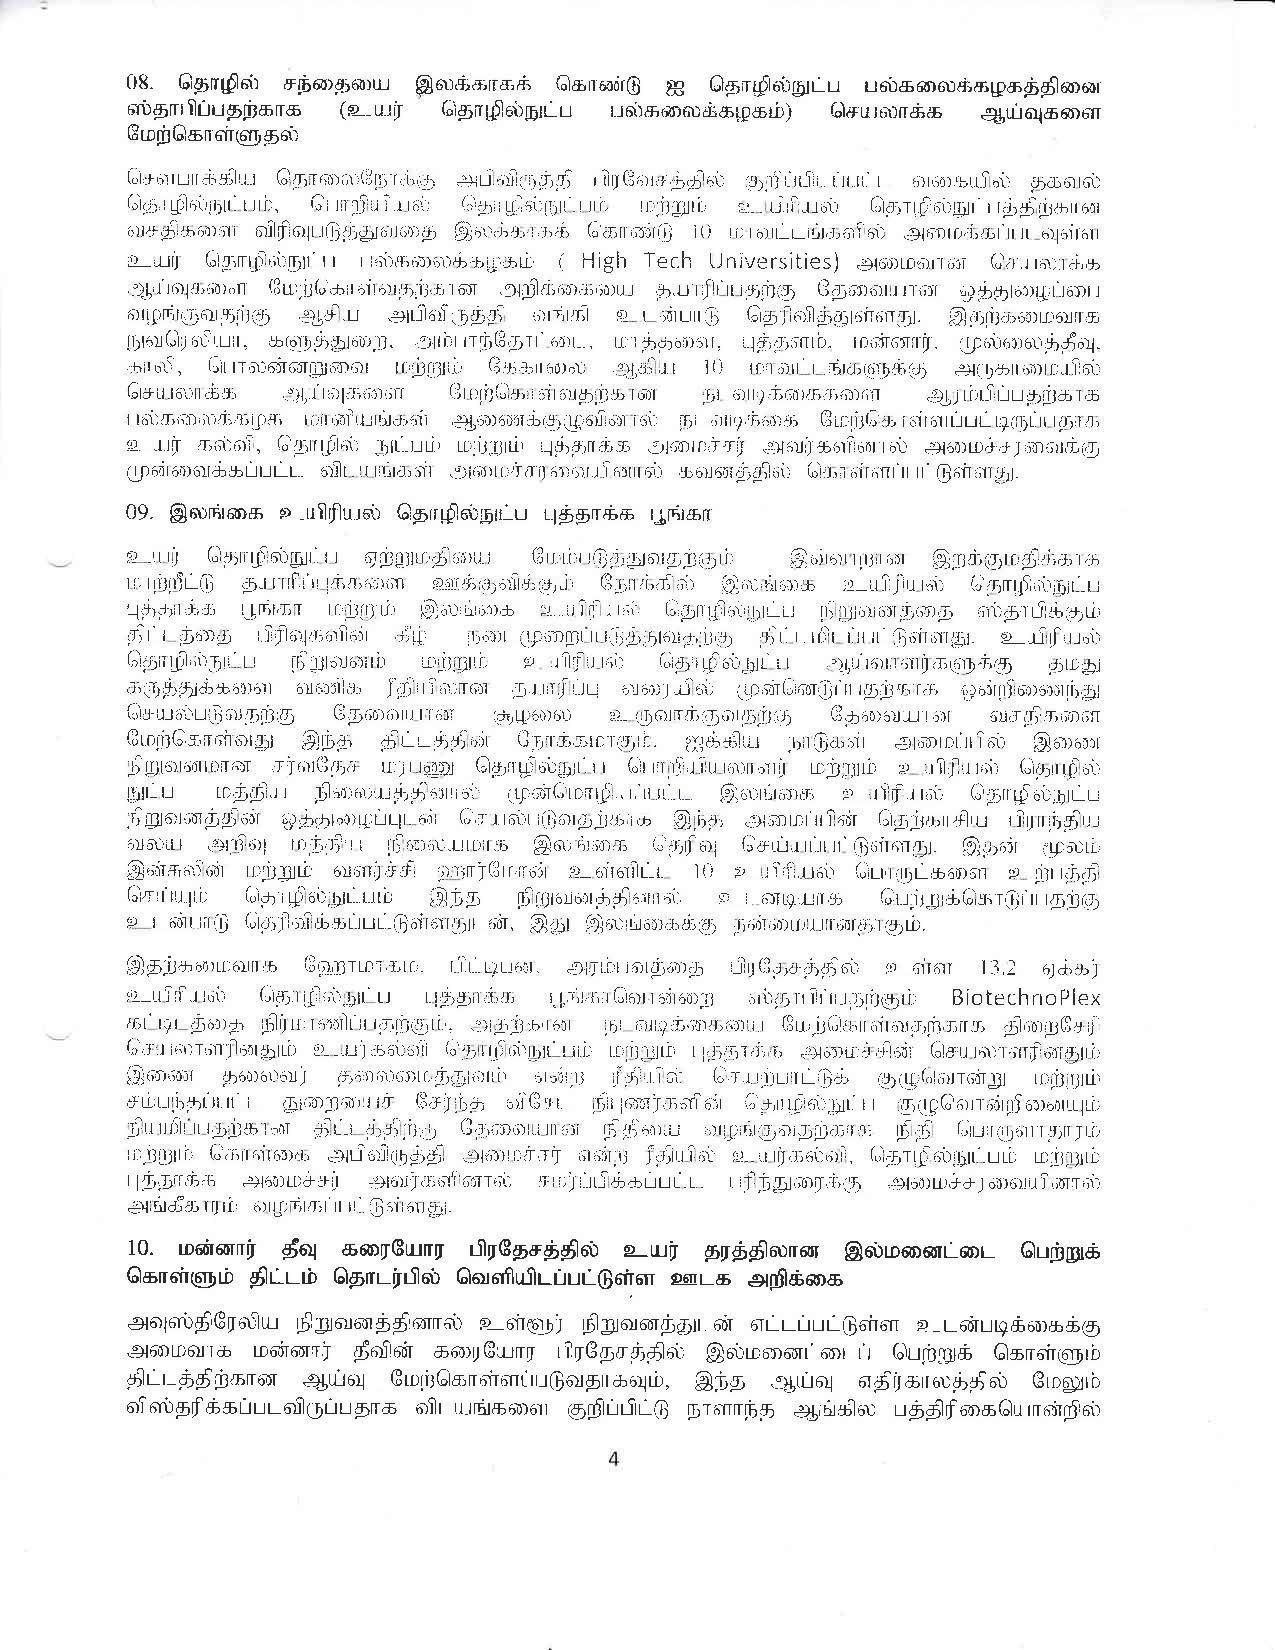 Cabinet Decision on 15.07.2020 Tamil page 004